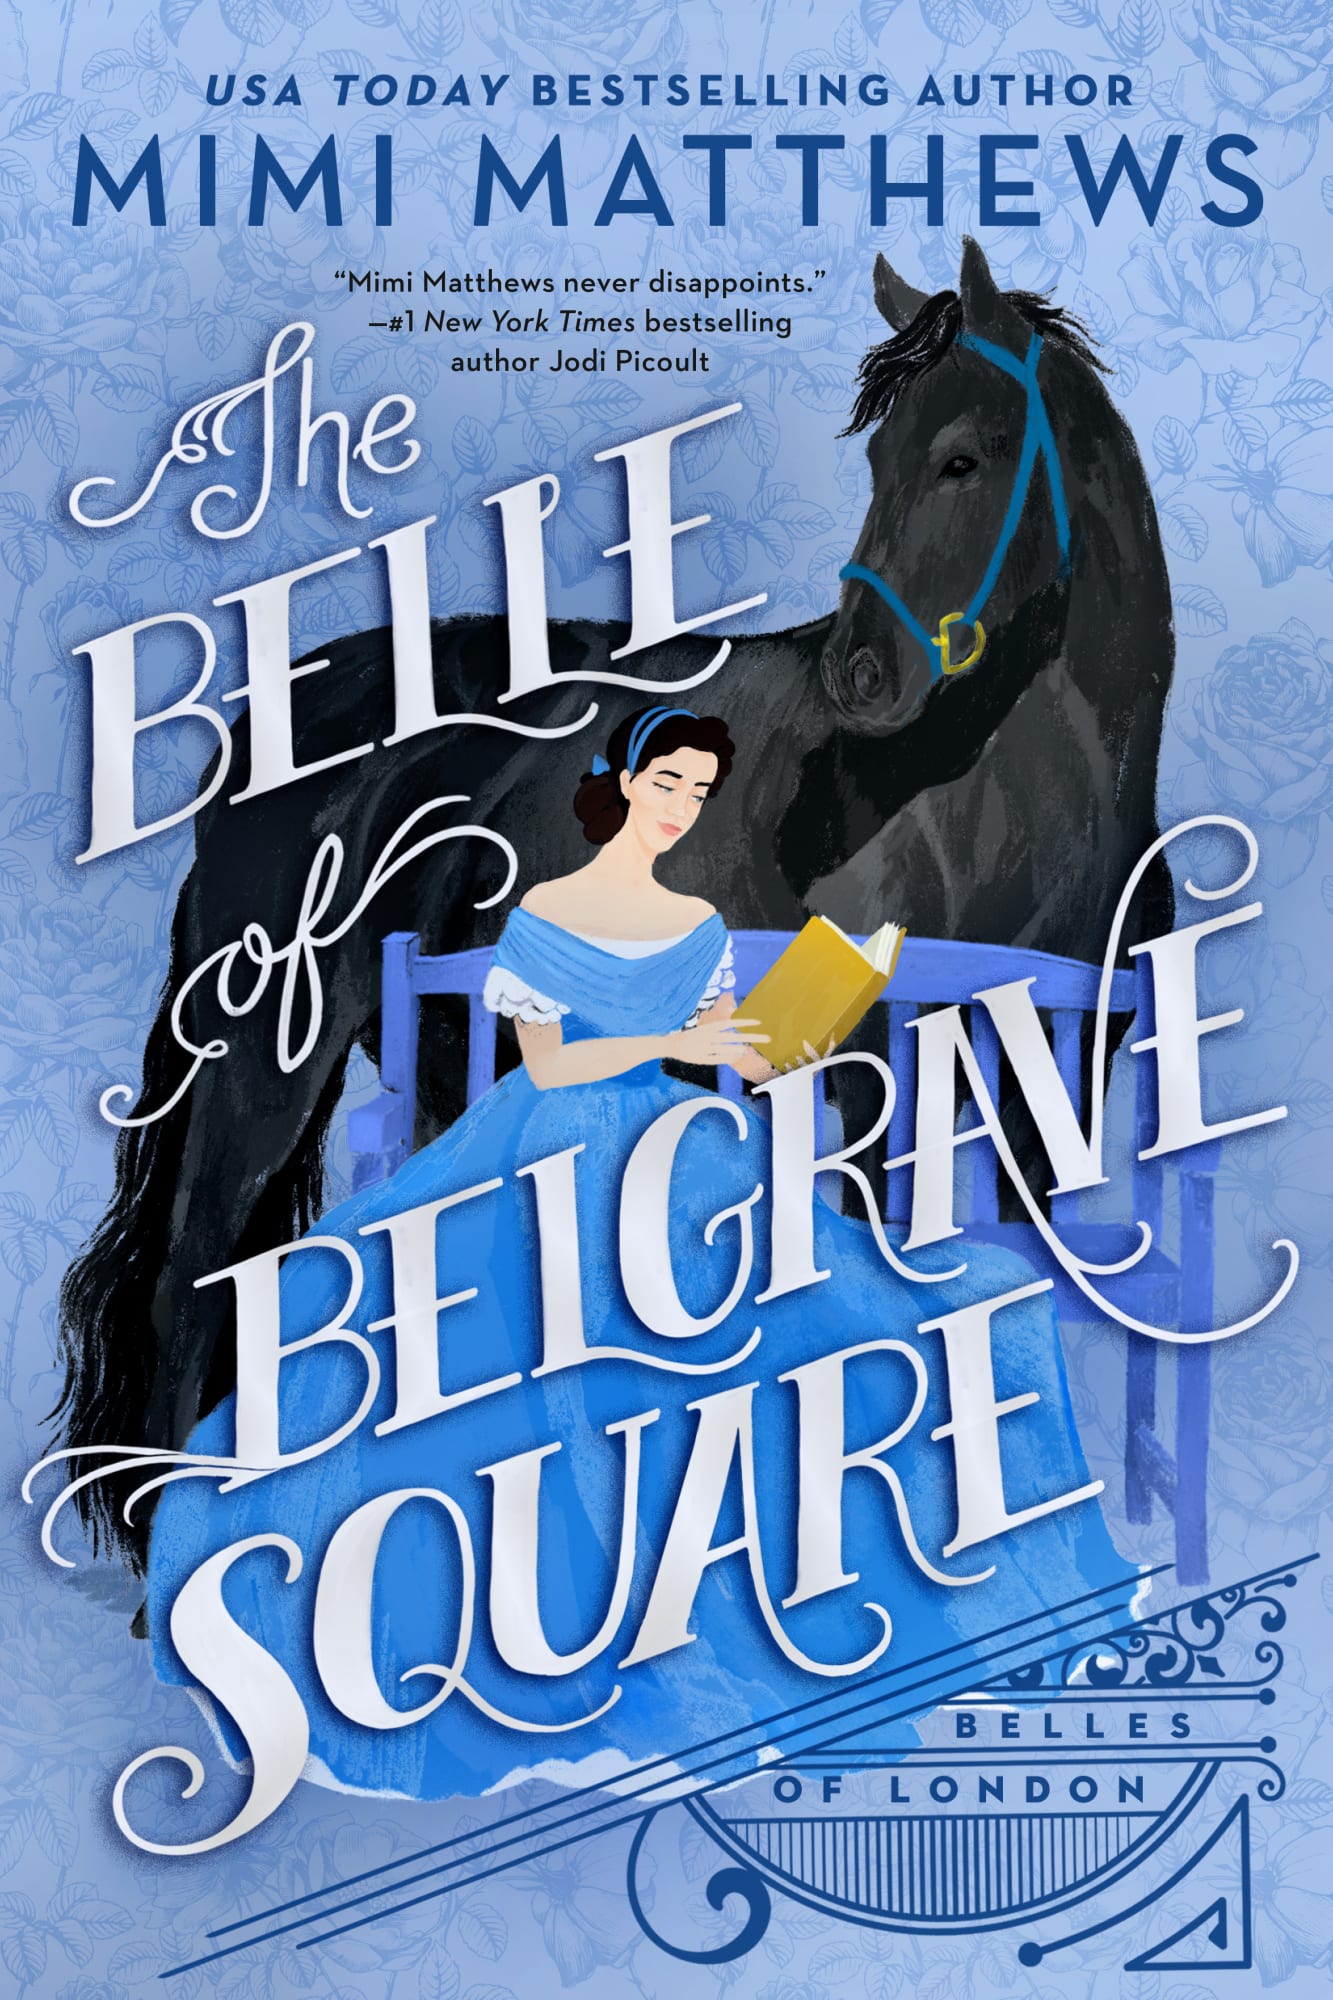 The Belle of Belgrave Square is the swoon-worthy Victorian romance you’ve been waiting for